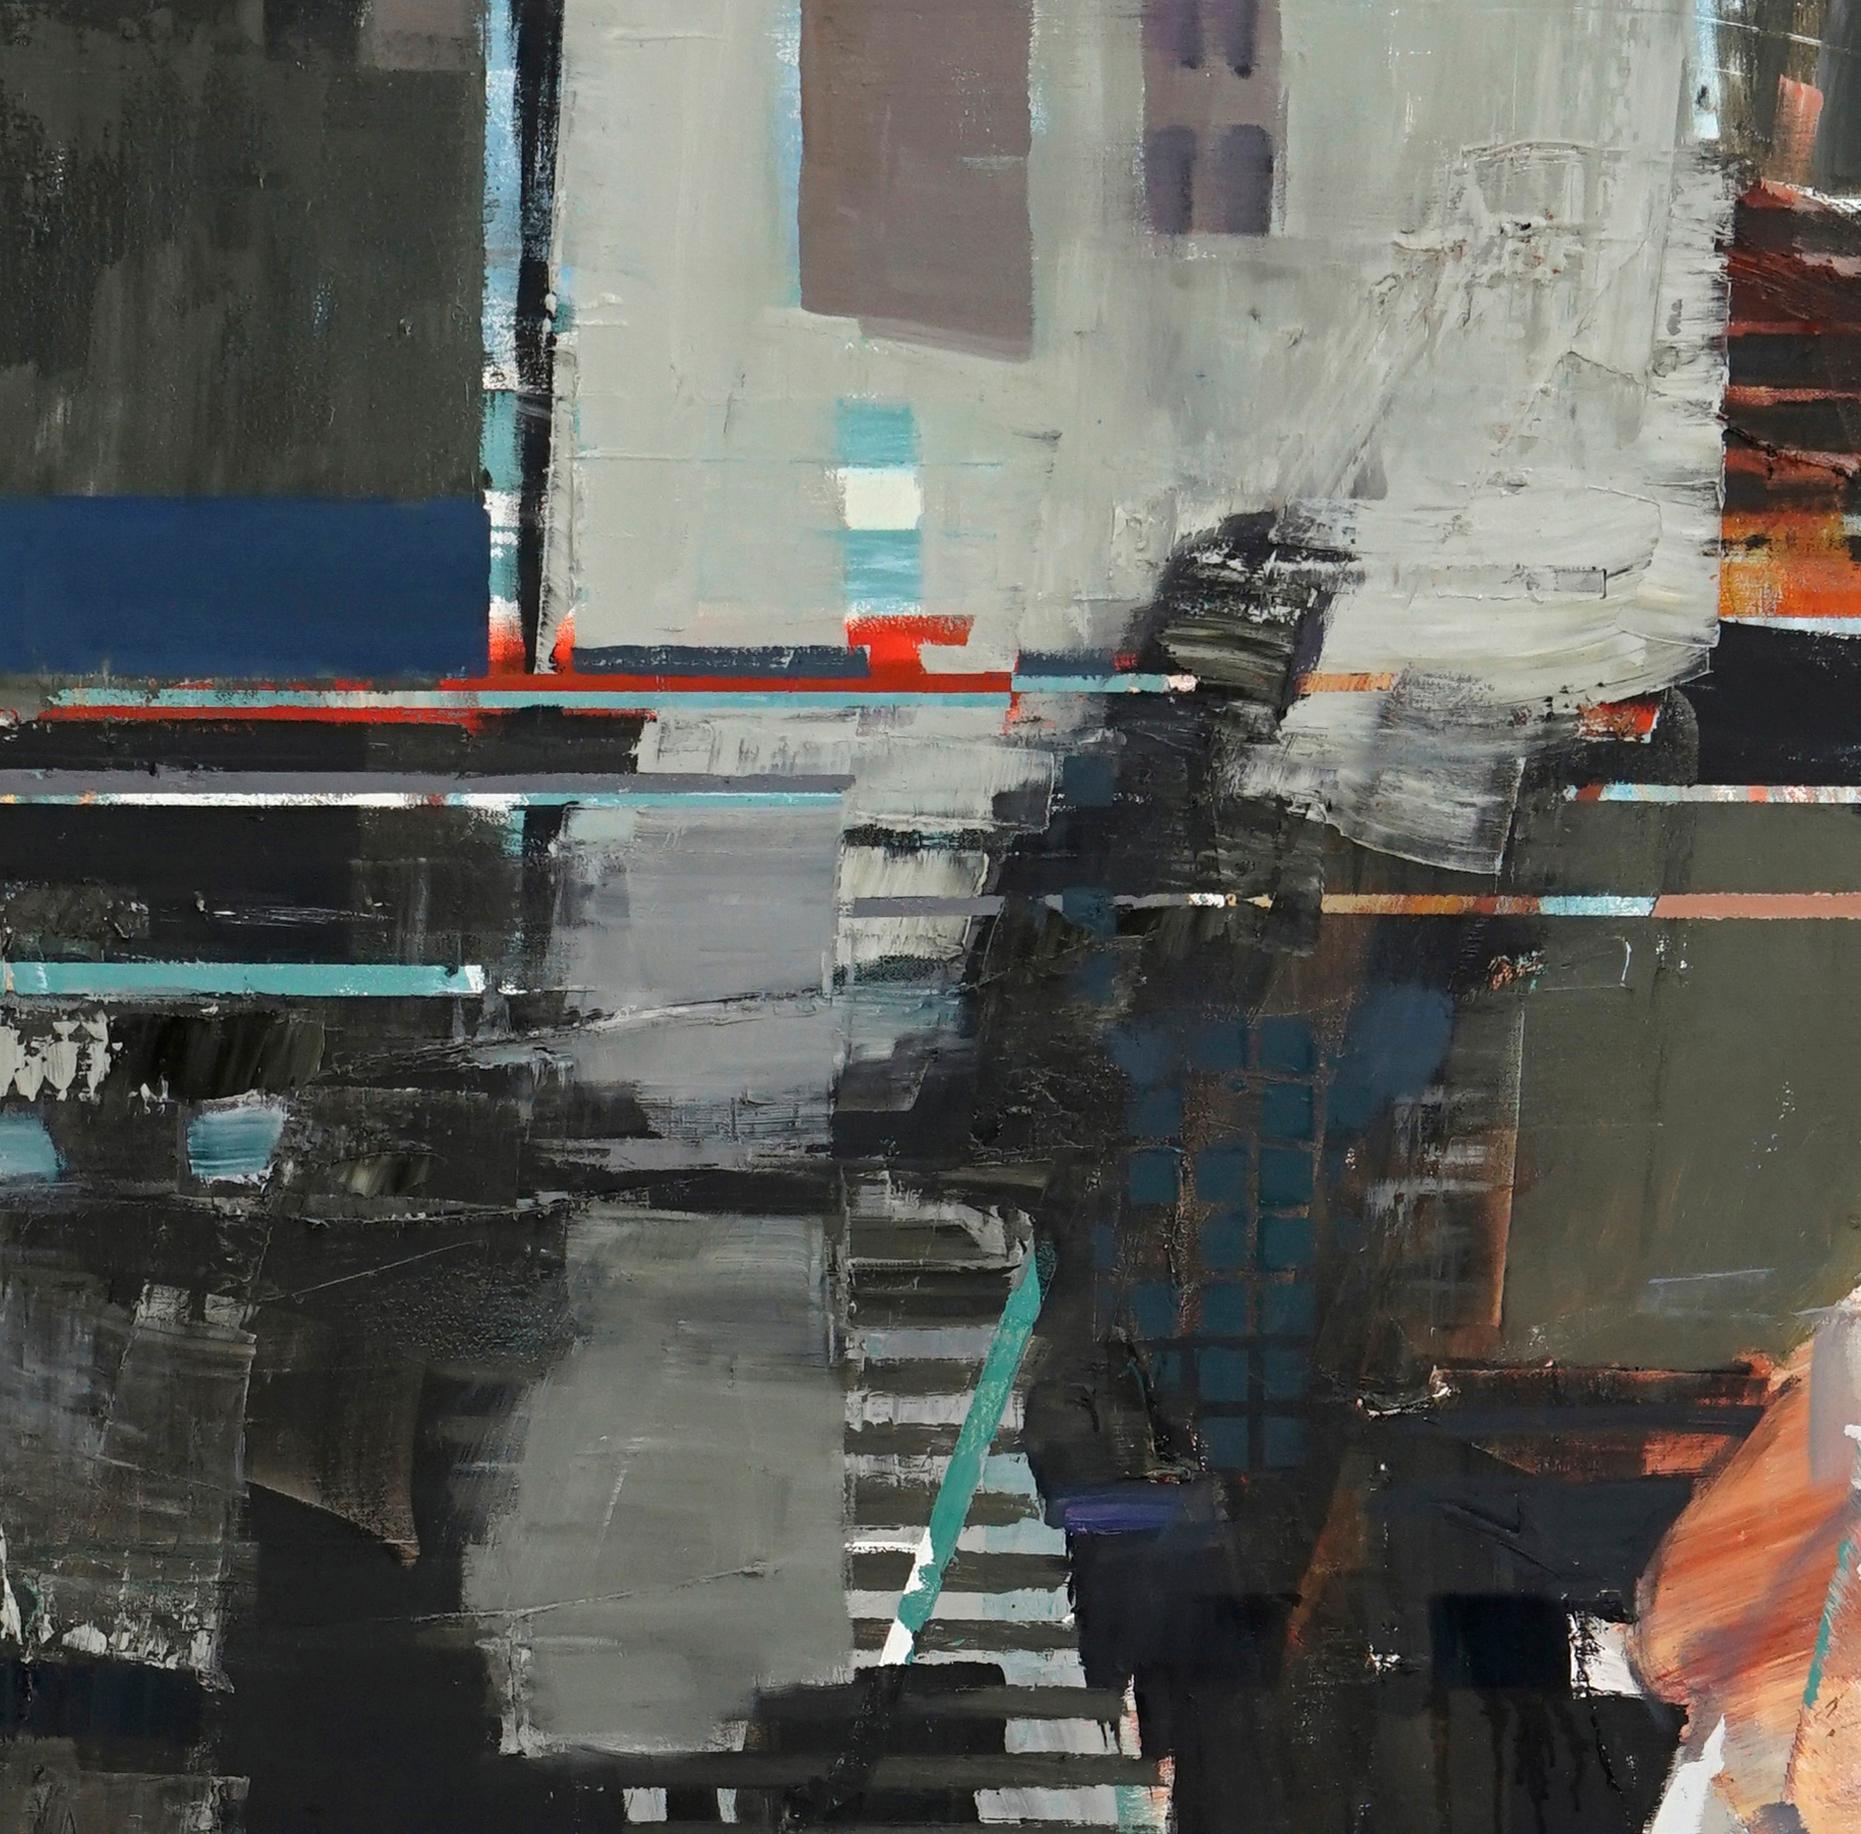 Dislocation, figurative, abstract, oil on canvas, city scene - Abstract Painting by Michael Azgour